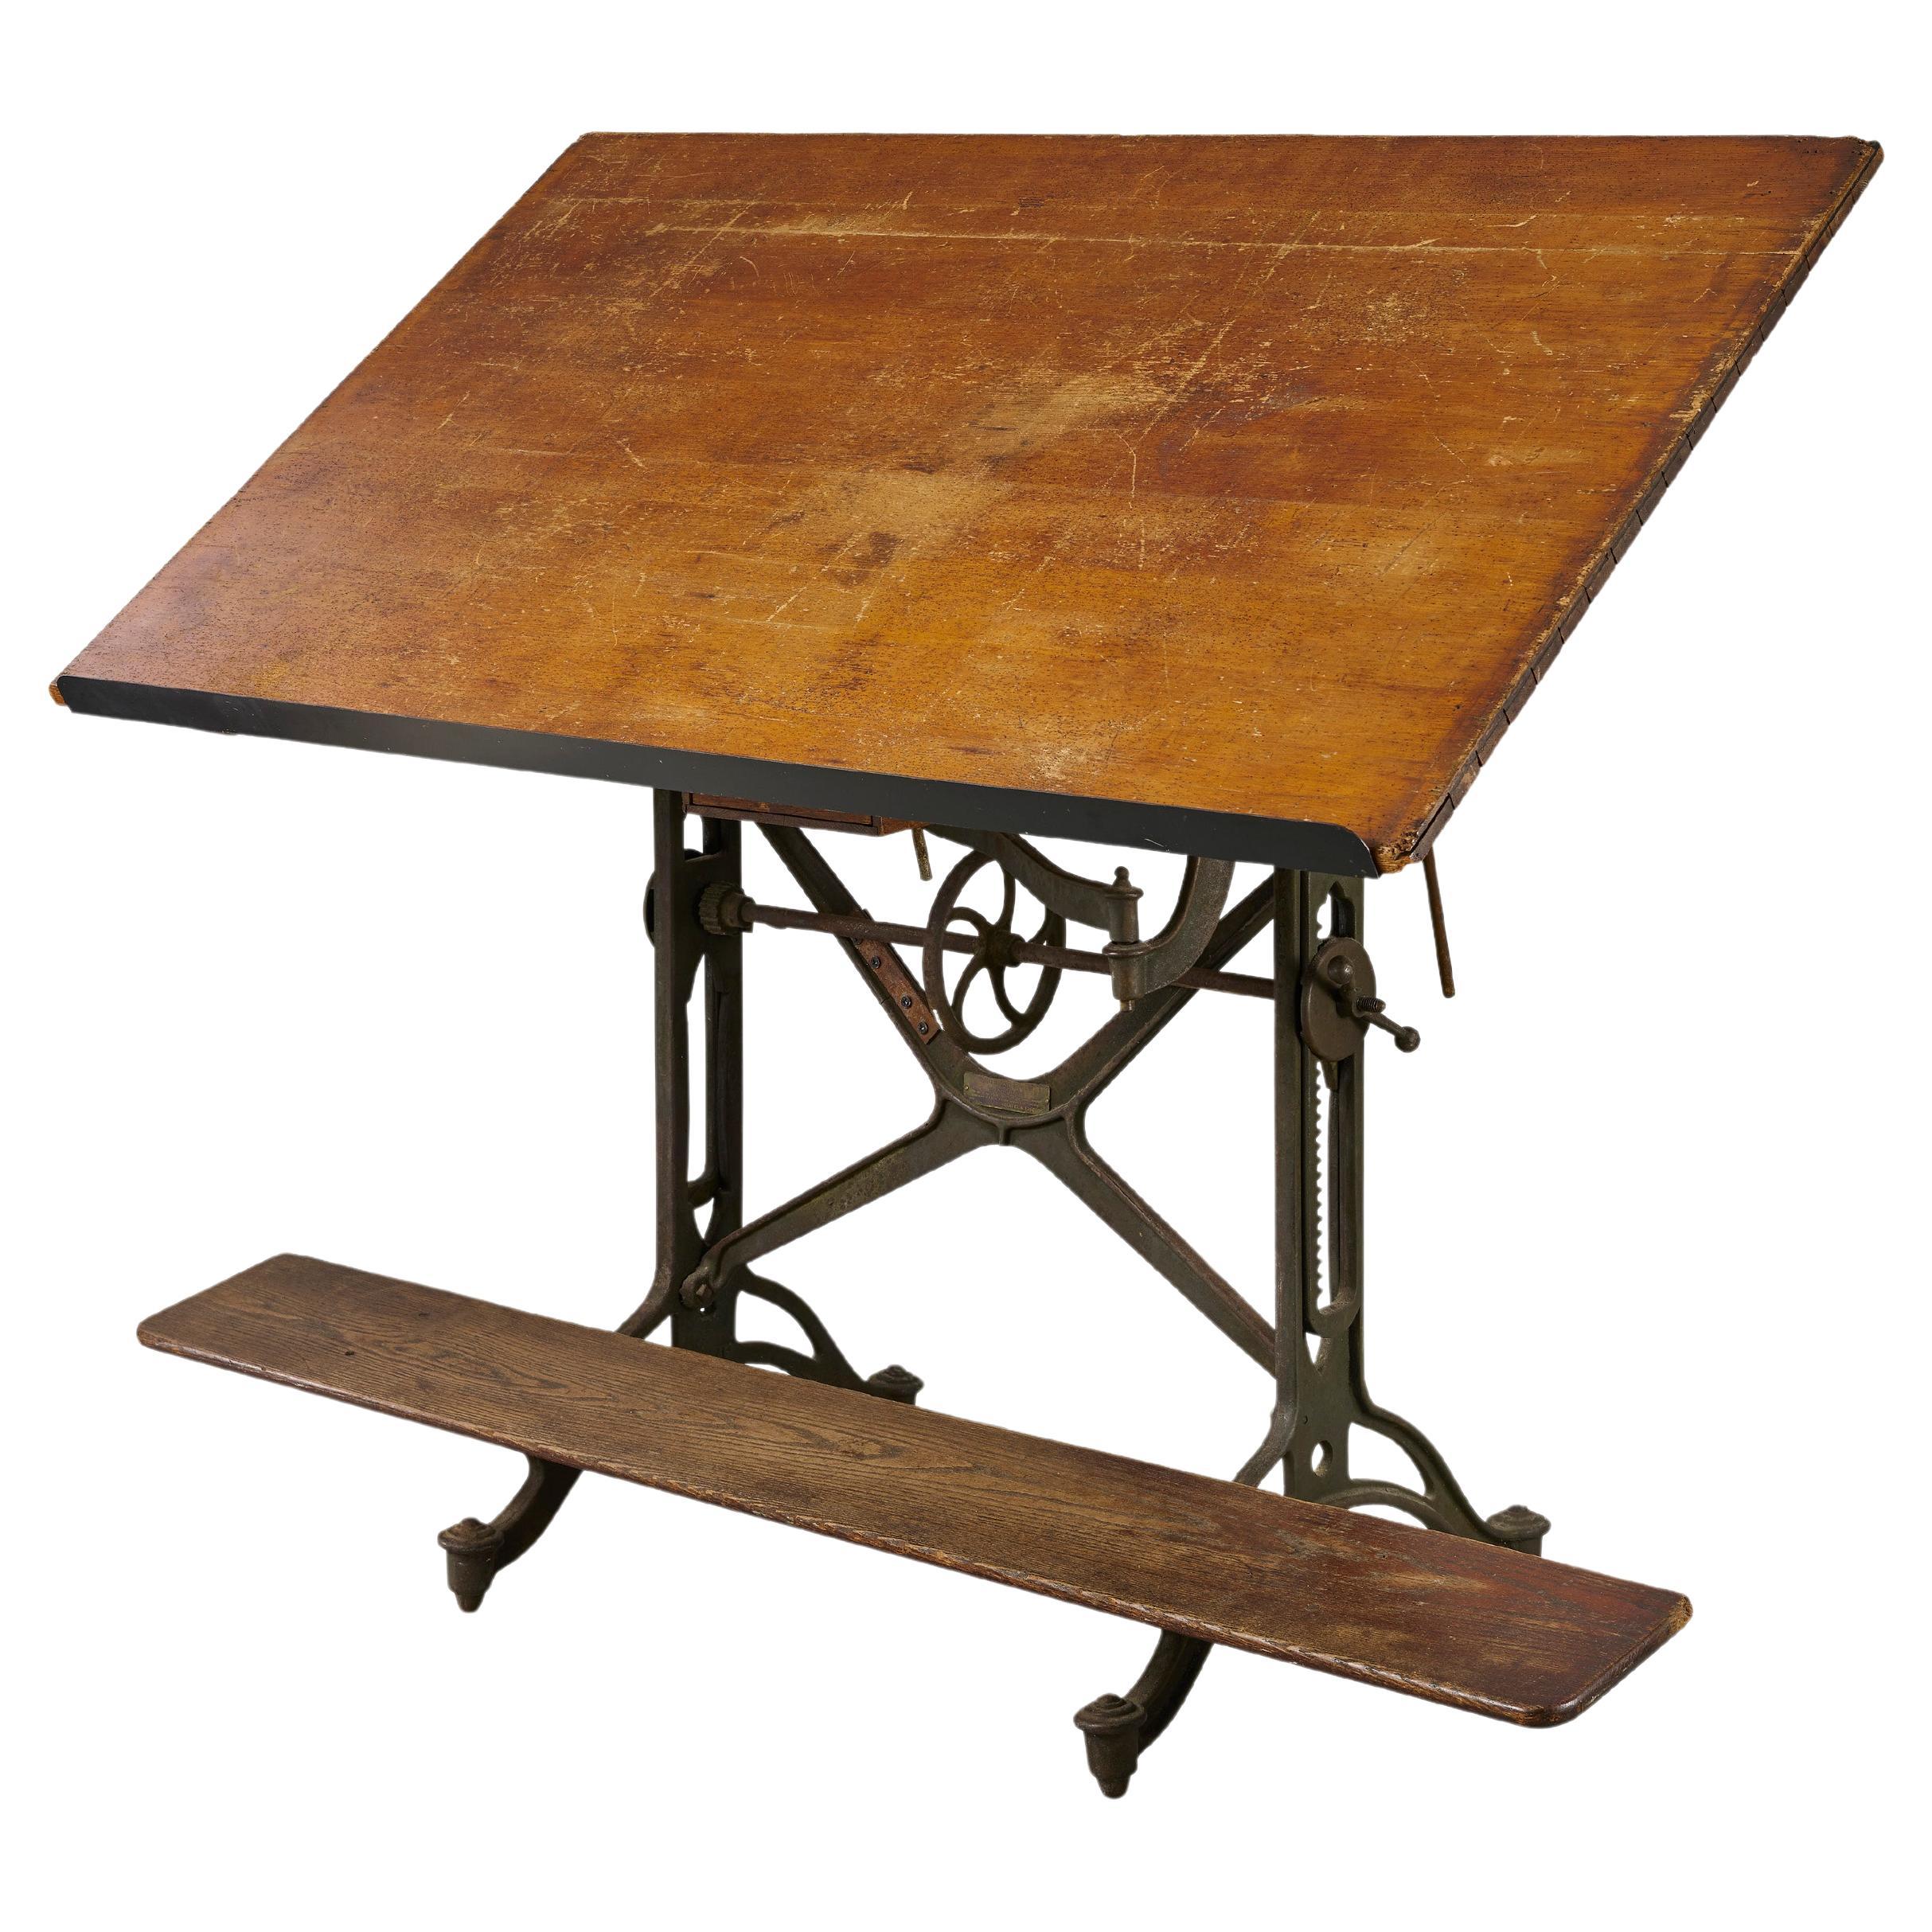 Original Keuffel and Esser Drafting Table For Sale